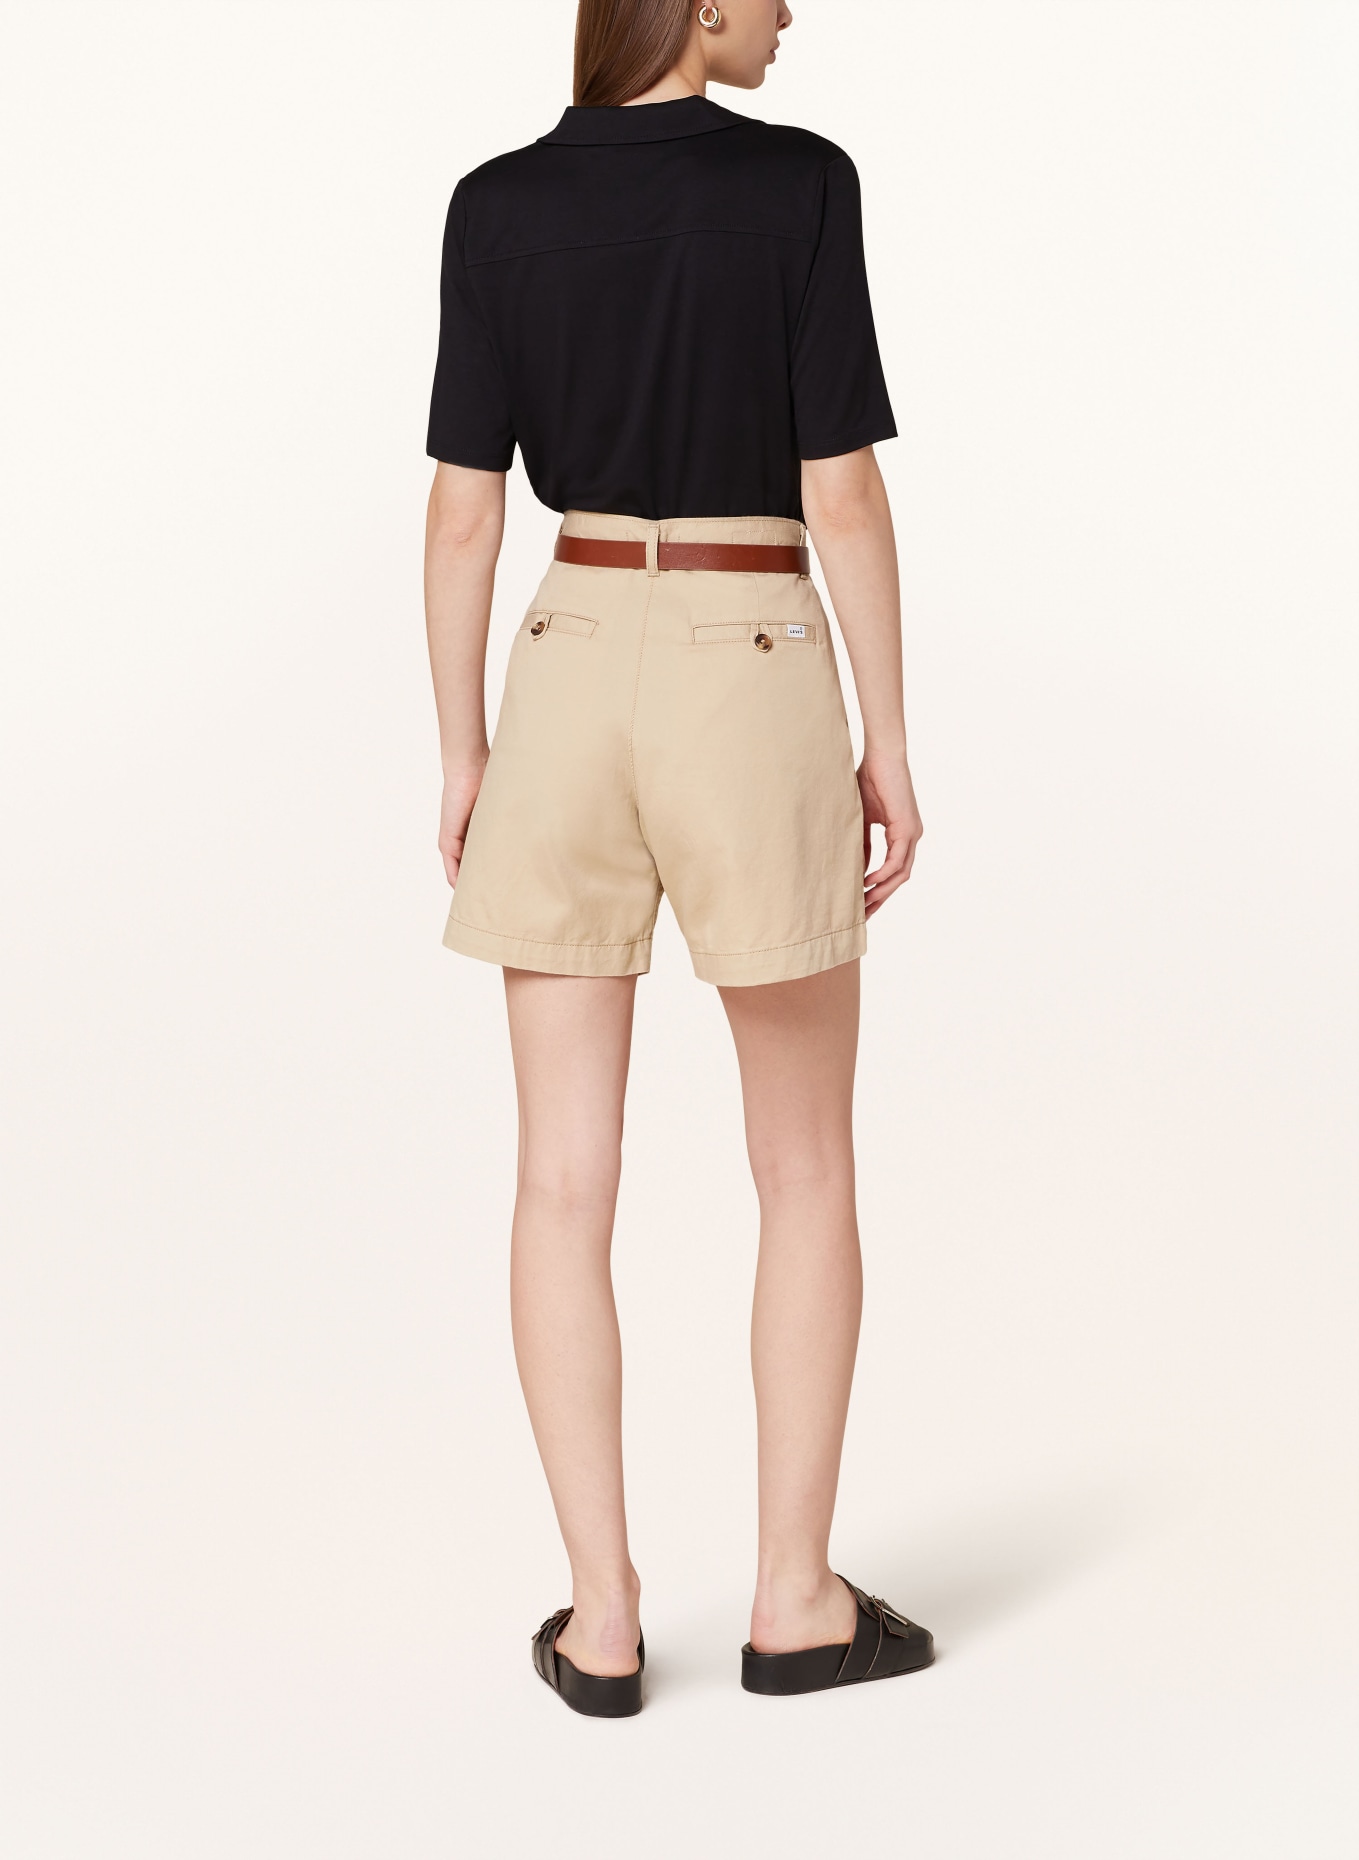 Marc O'Polo Shirt blouse made of jersey, Color: BLACK (Image 3)